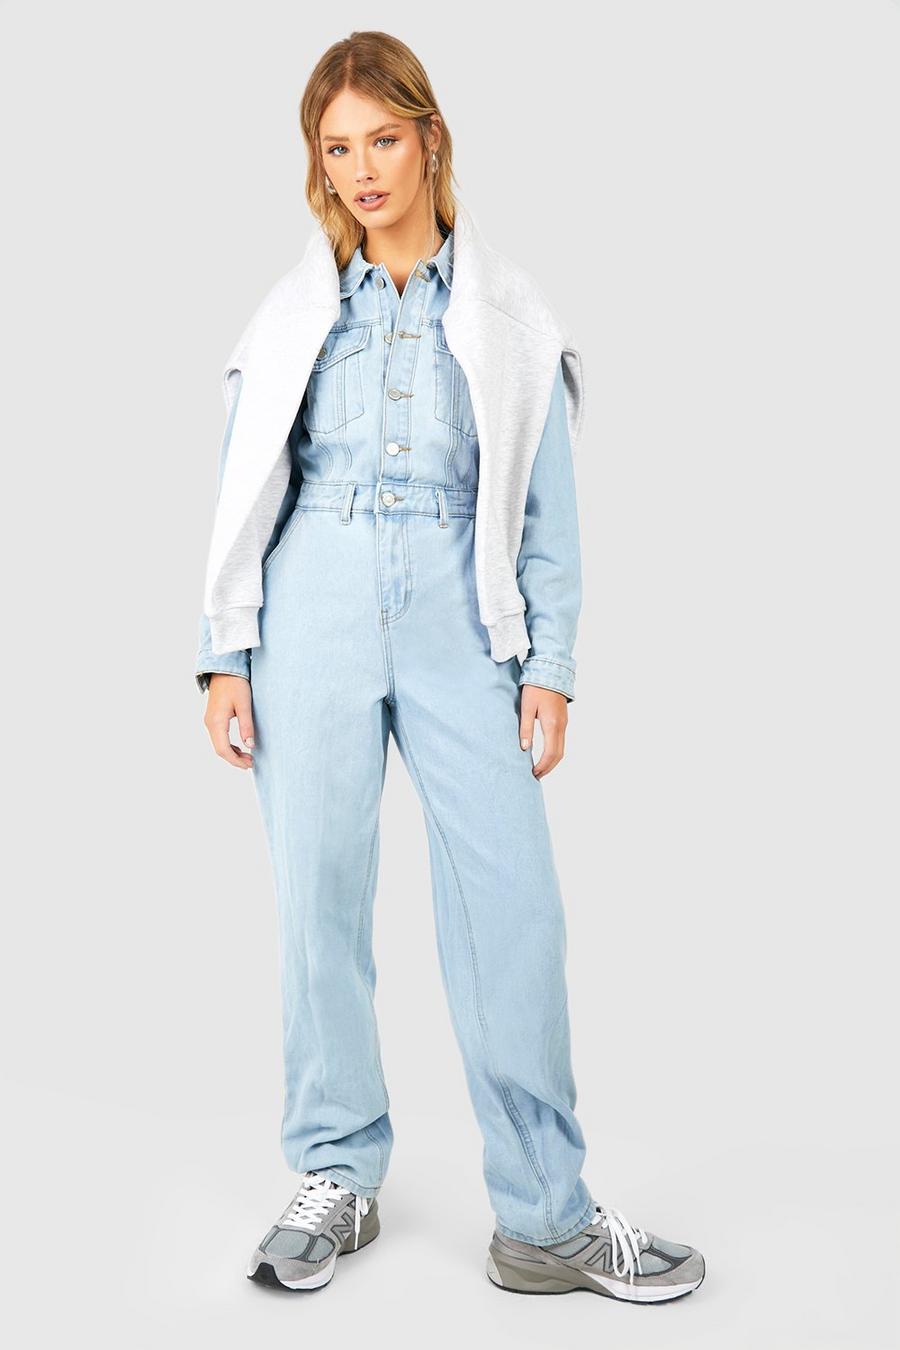 Wash Clothing Company Daphne Women's Dungarees with Cargo Pockets Denim  Dungarees Jumpsuit - blue, size: 36 : : Fashion